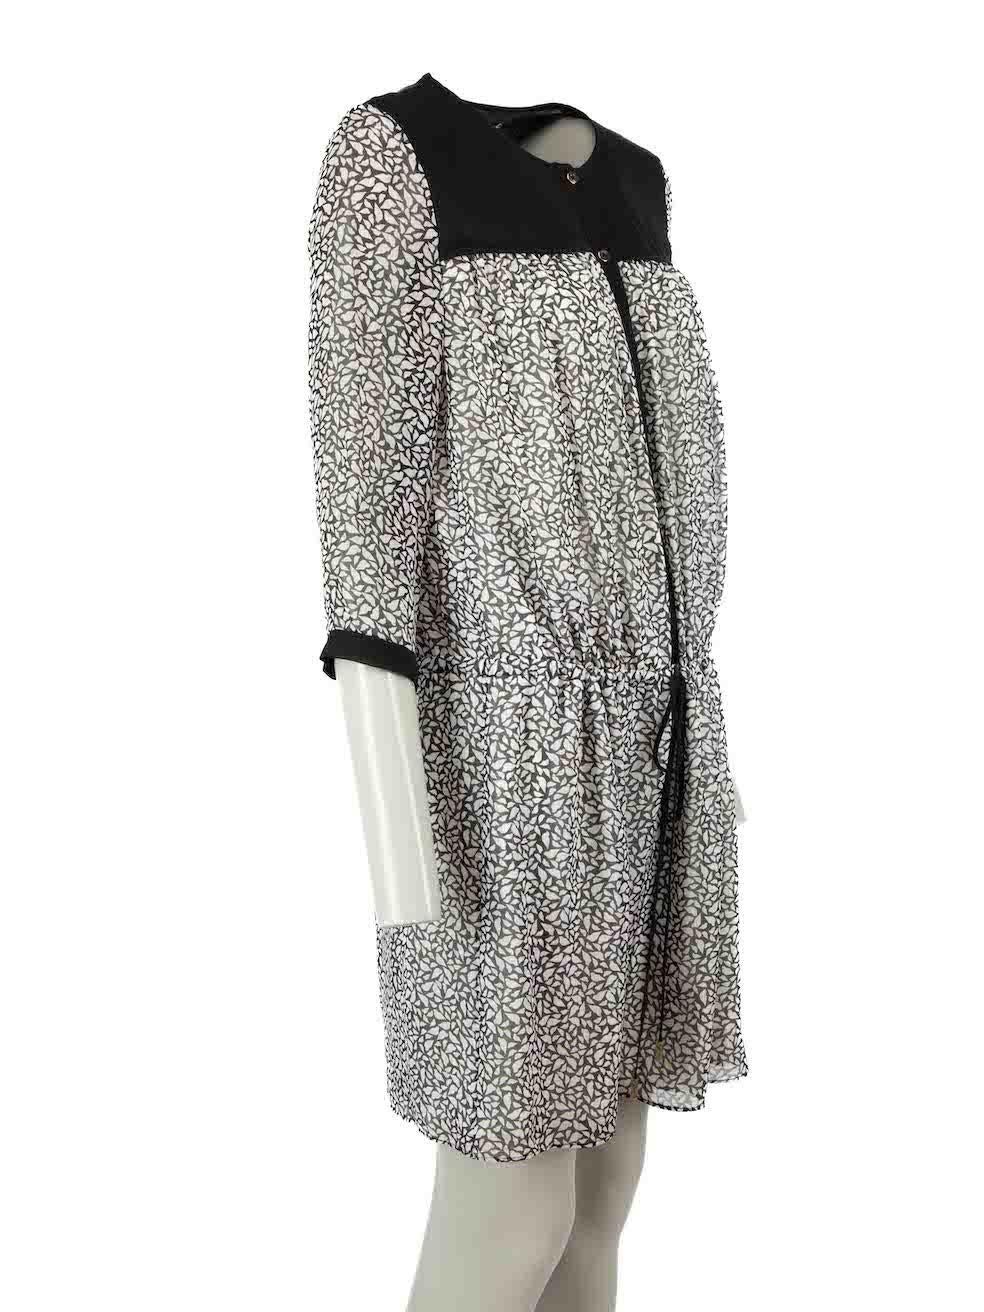 CONDITION is Good. Minor wear to dress is evident. Light wear to fabric with a handful of pulls to the weave found at the sleeves and a small discoloured mark found at the front on this used Diane Von Furstenberg designer resale item.
 
 Details
